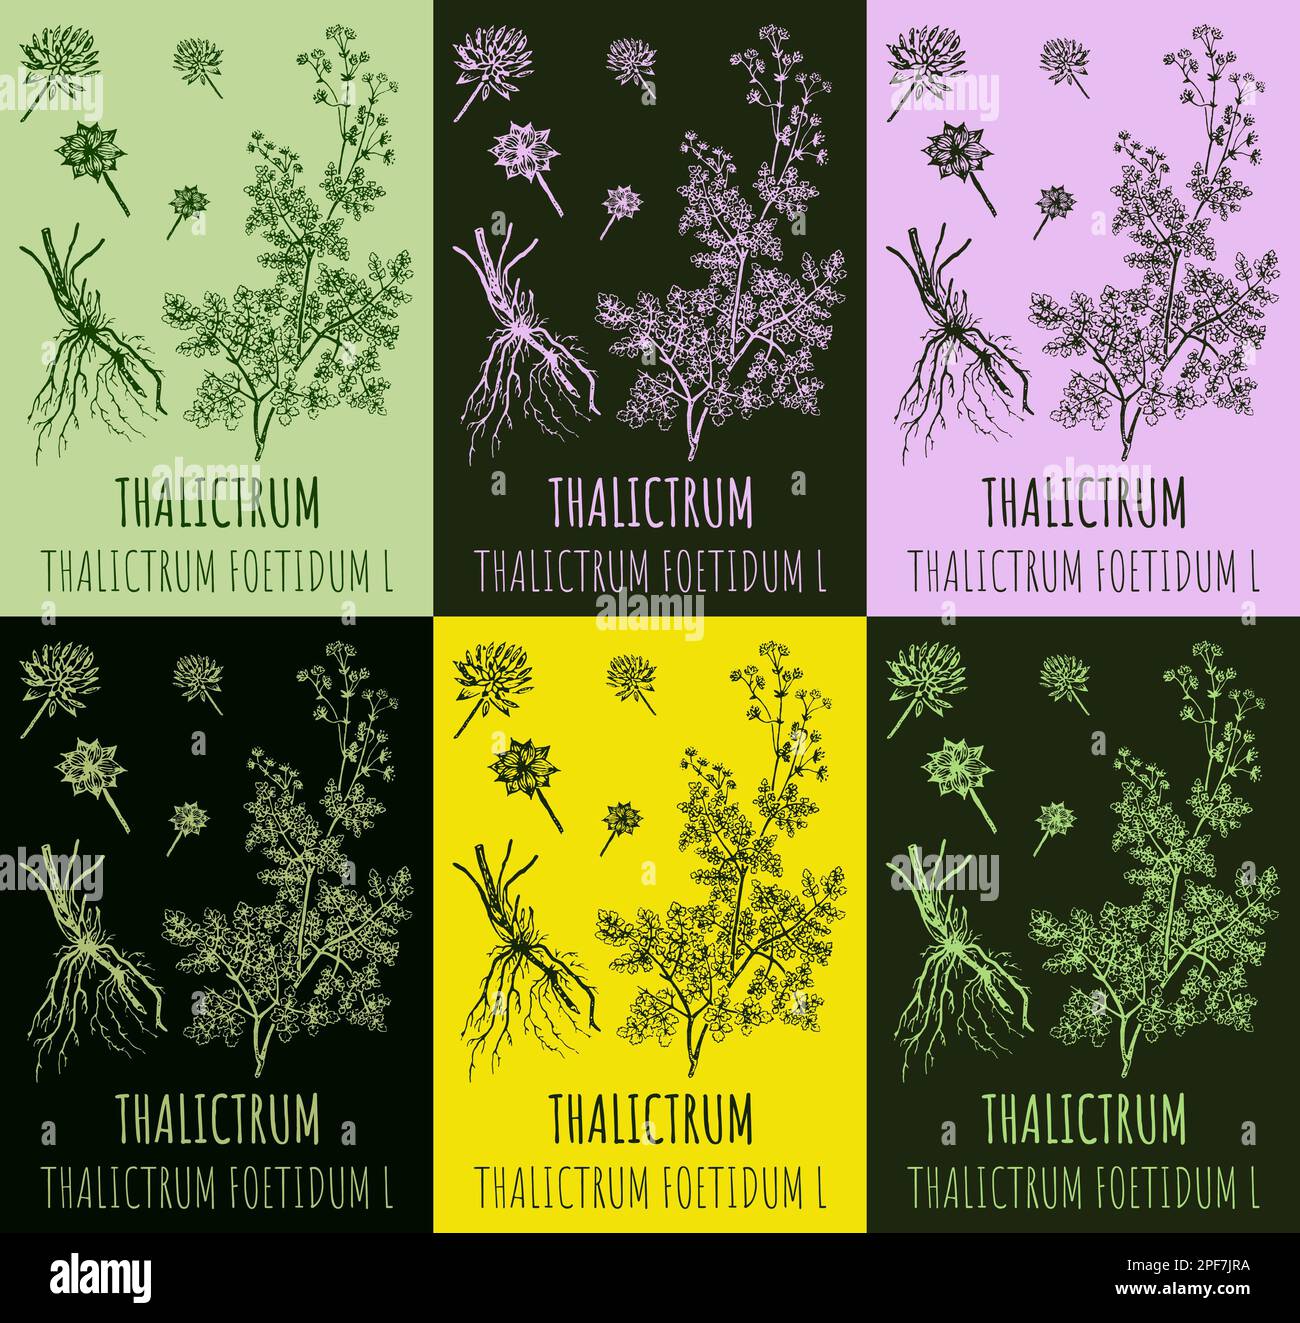 Set of drawings THALICTRUM in different colors. Hand drawn illustration. Latin name THALICTRUM FOETIDUM L. Stock Photo